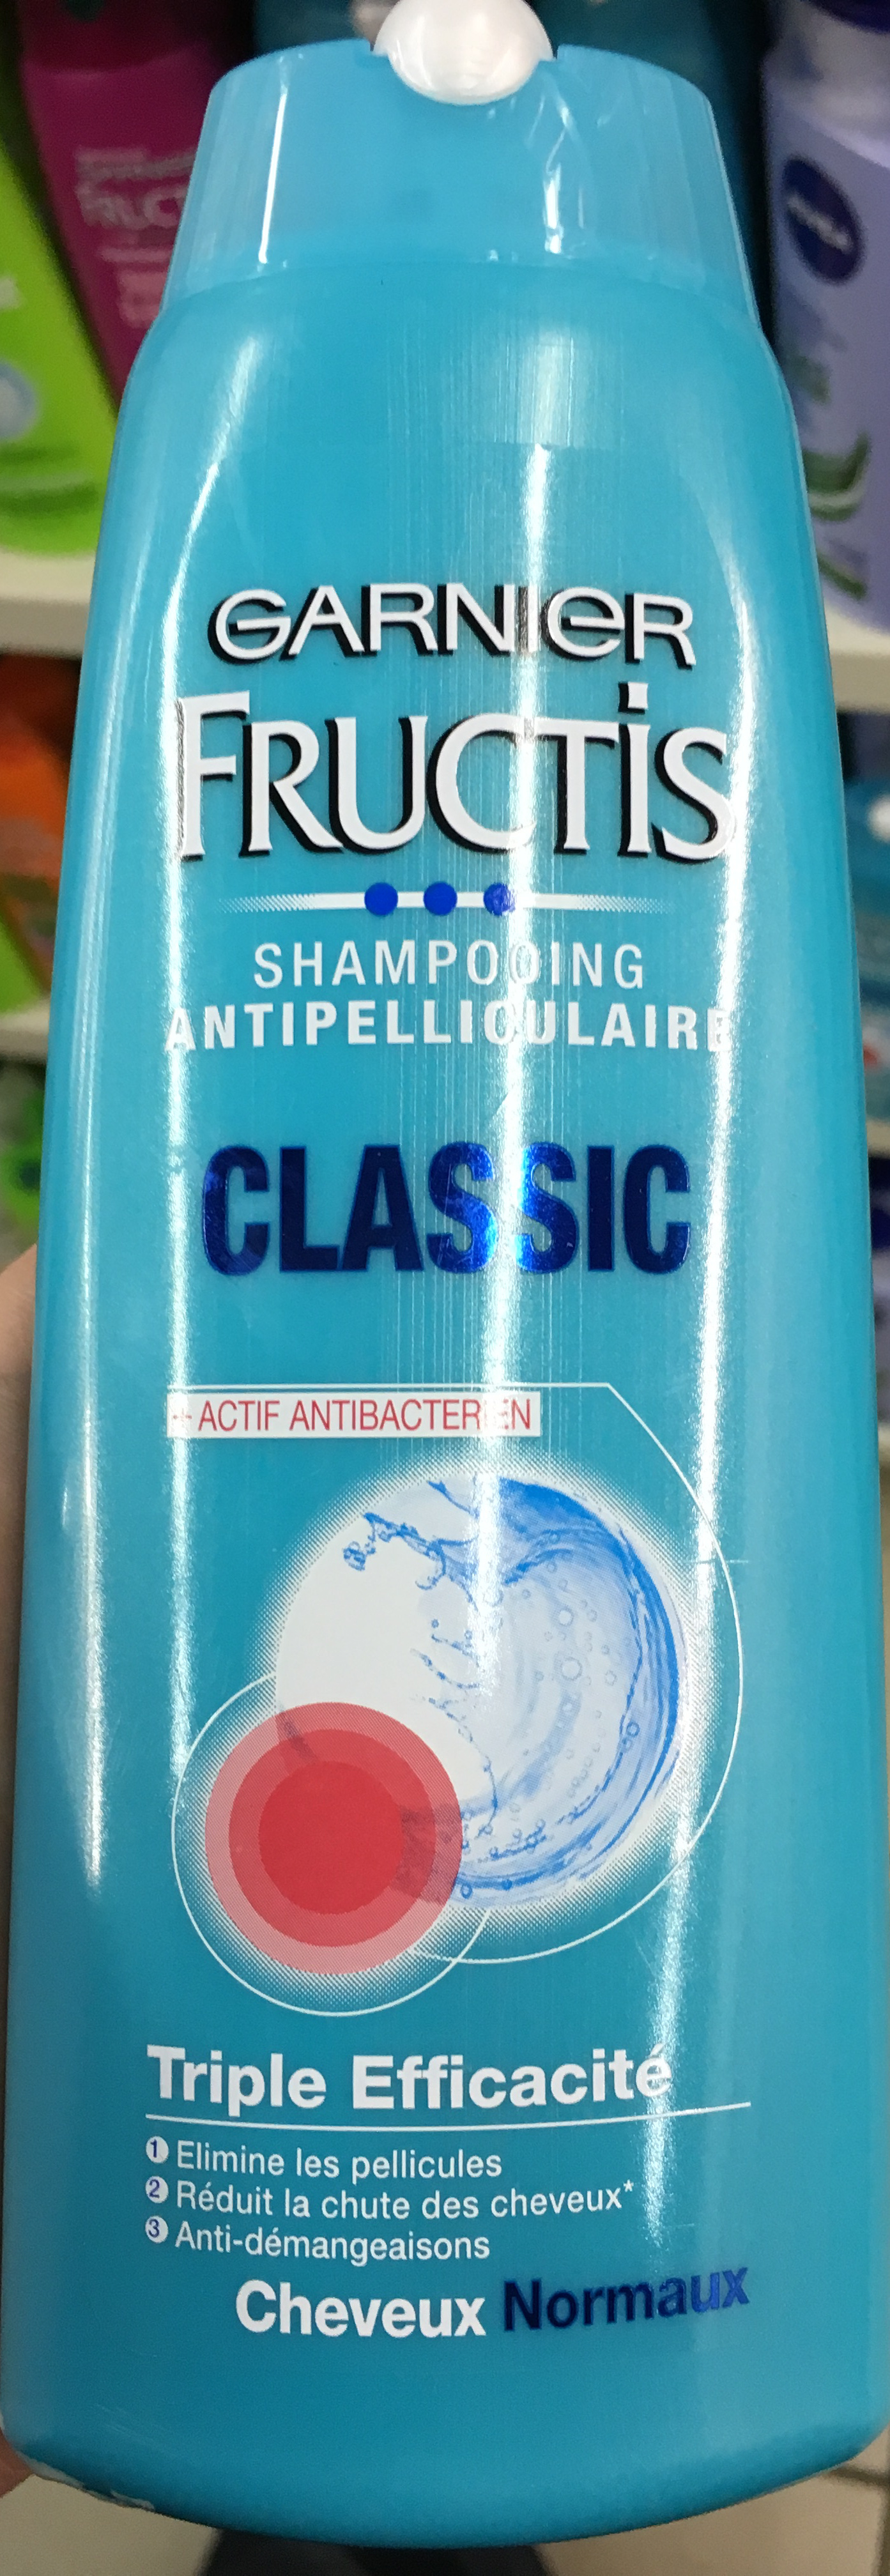 Fructis Shampooing antipelliculaire Classic - Product - fr